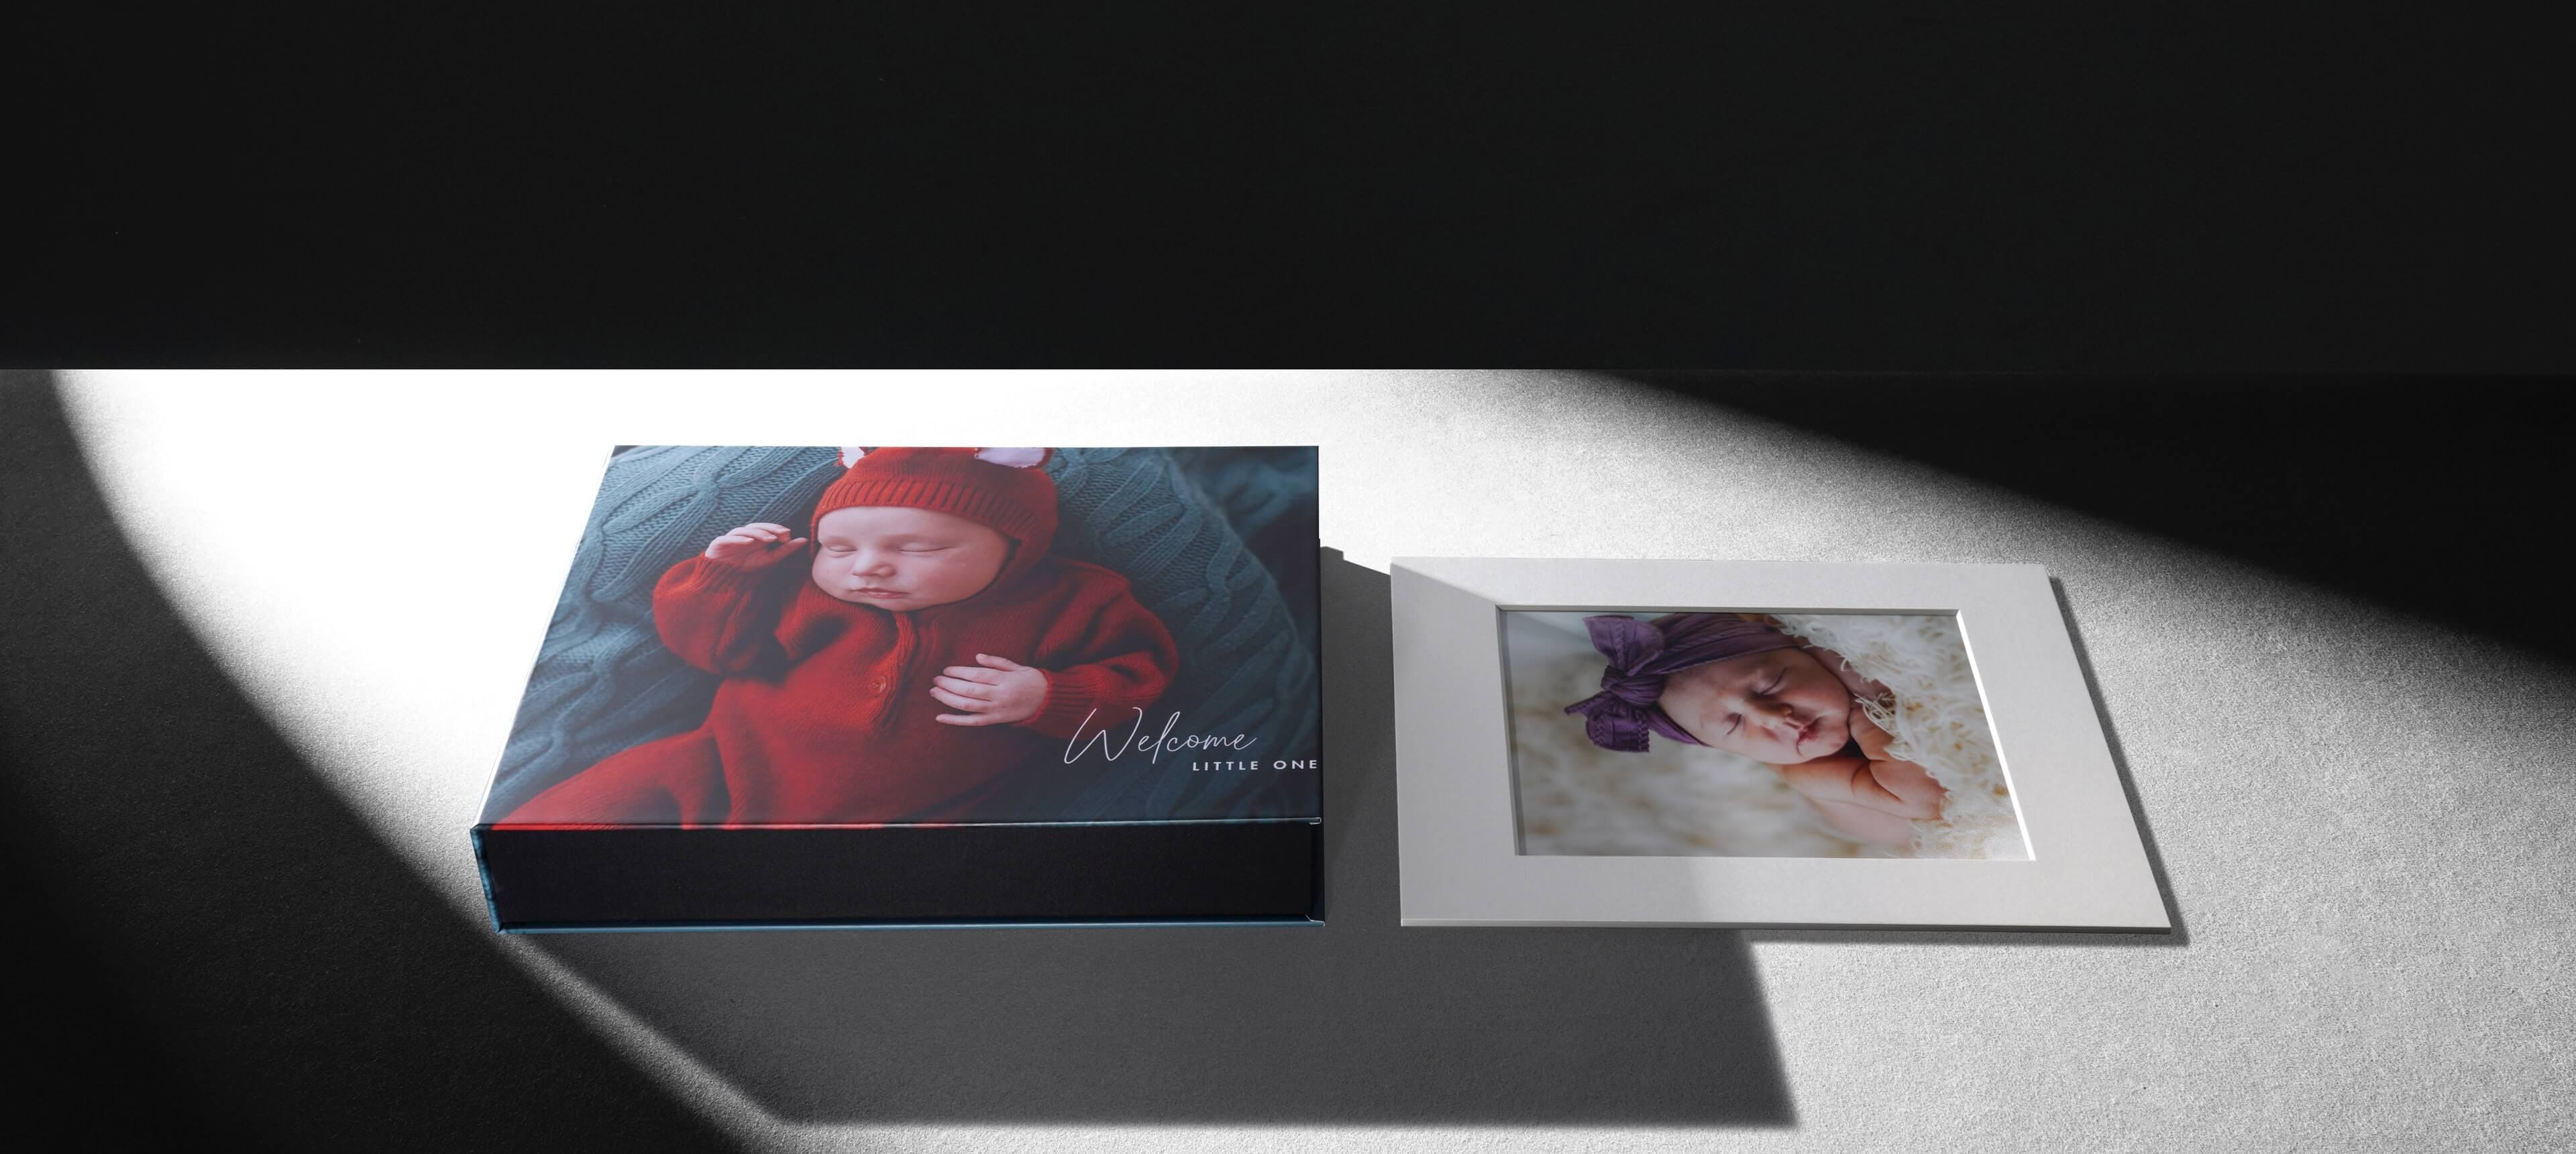 a image box set showing a matted photo next to a box with a baby image printed on it